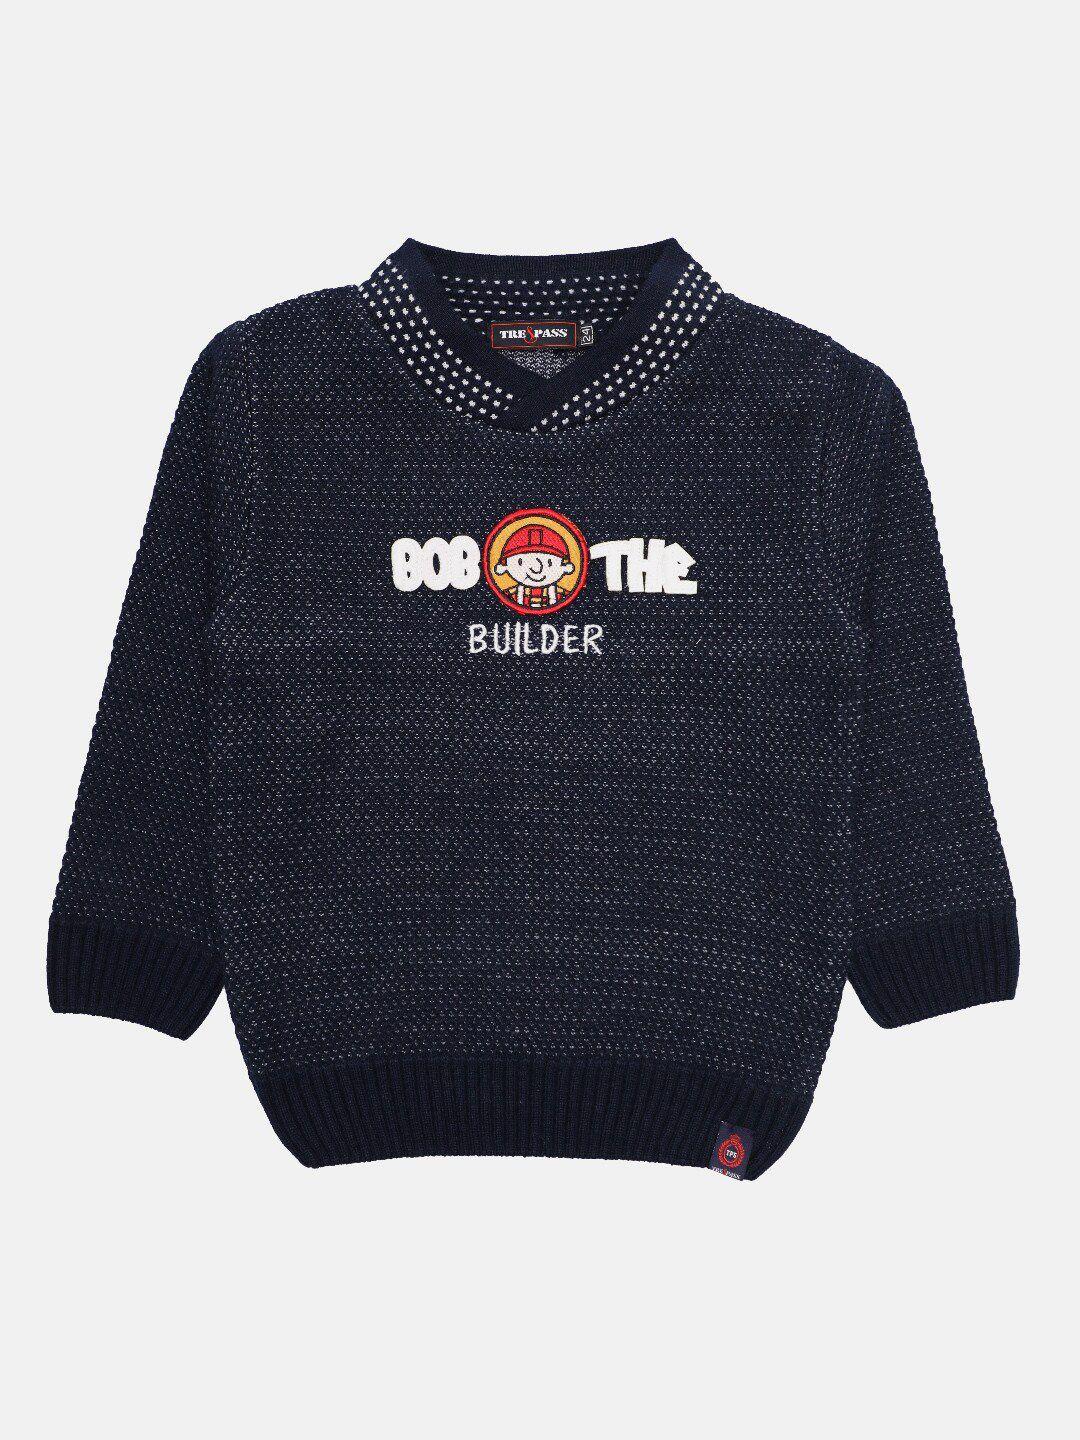 tre&pass-boys-navy-blue-&-white-printed-woolen-pullover